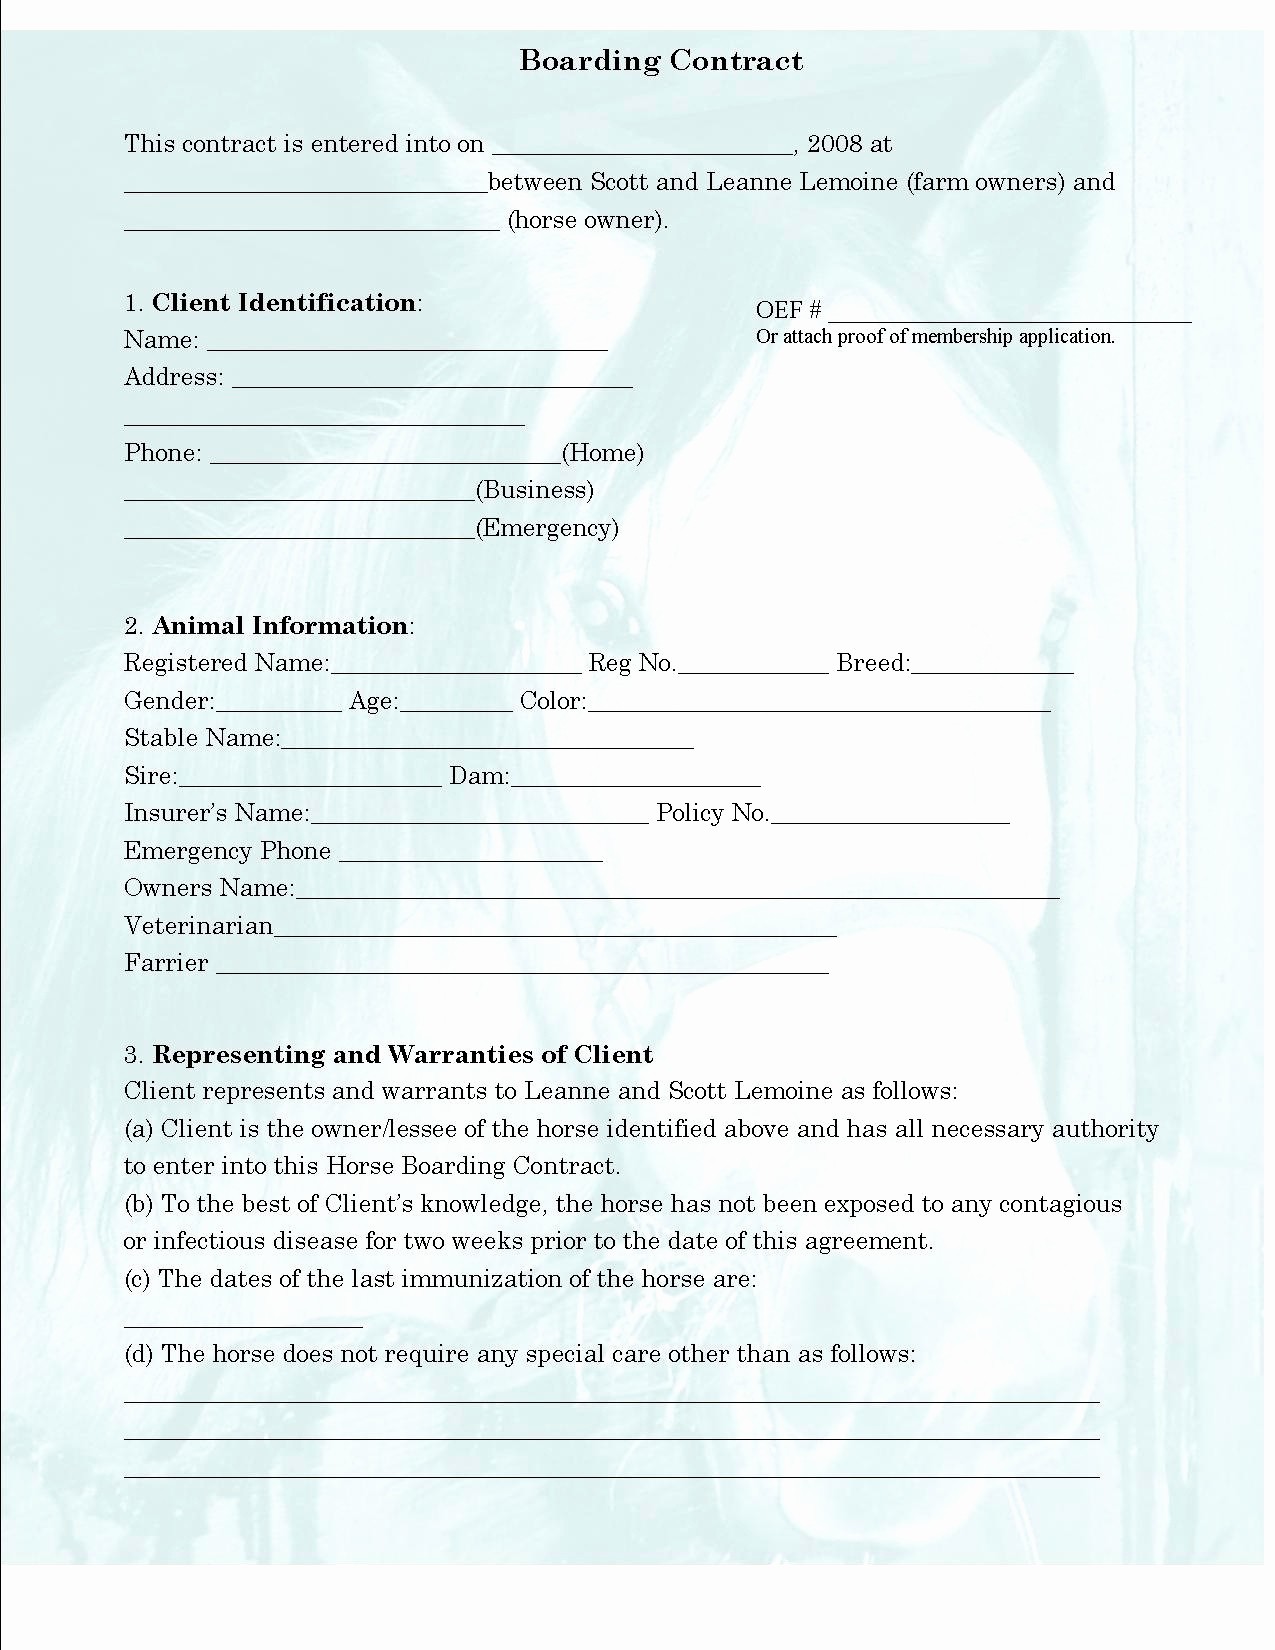 Dog Breeding Contract Template Awesome Document Horse Boarding